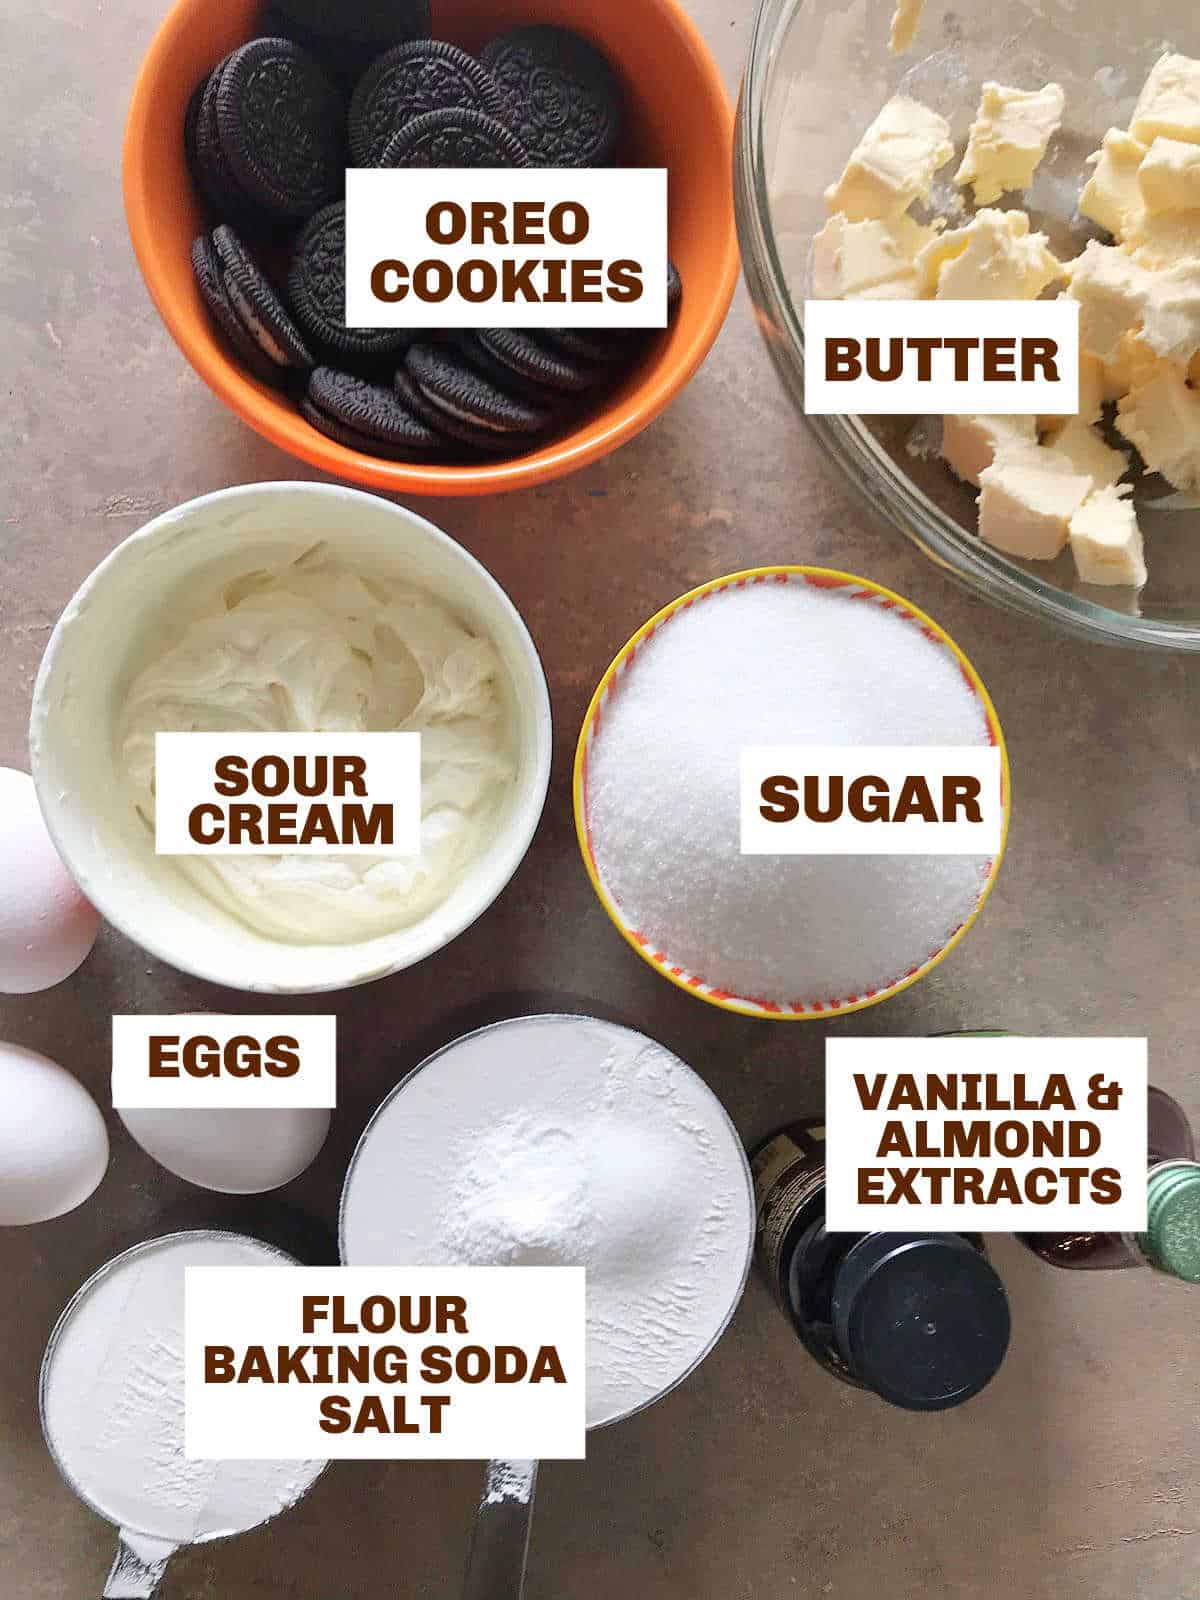 Brownish surface with bowls containing ingredients for oreo cake including butter, sugar, sour cream, flour, extracts, eggs.